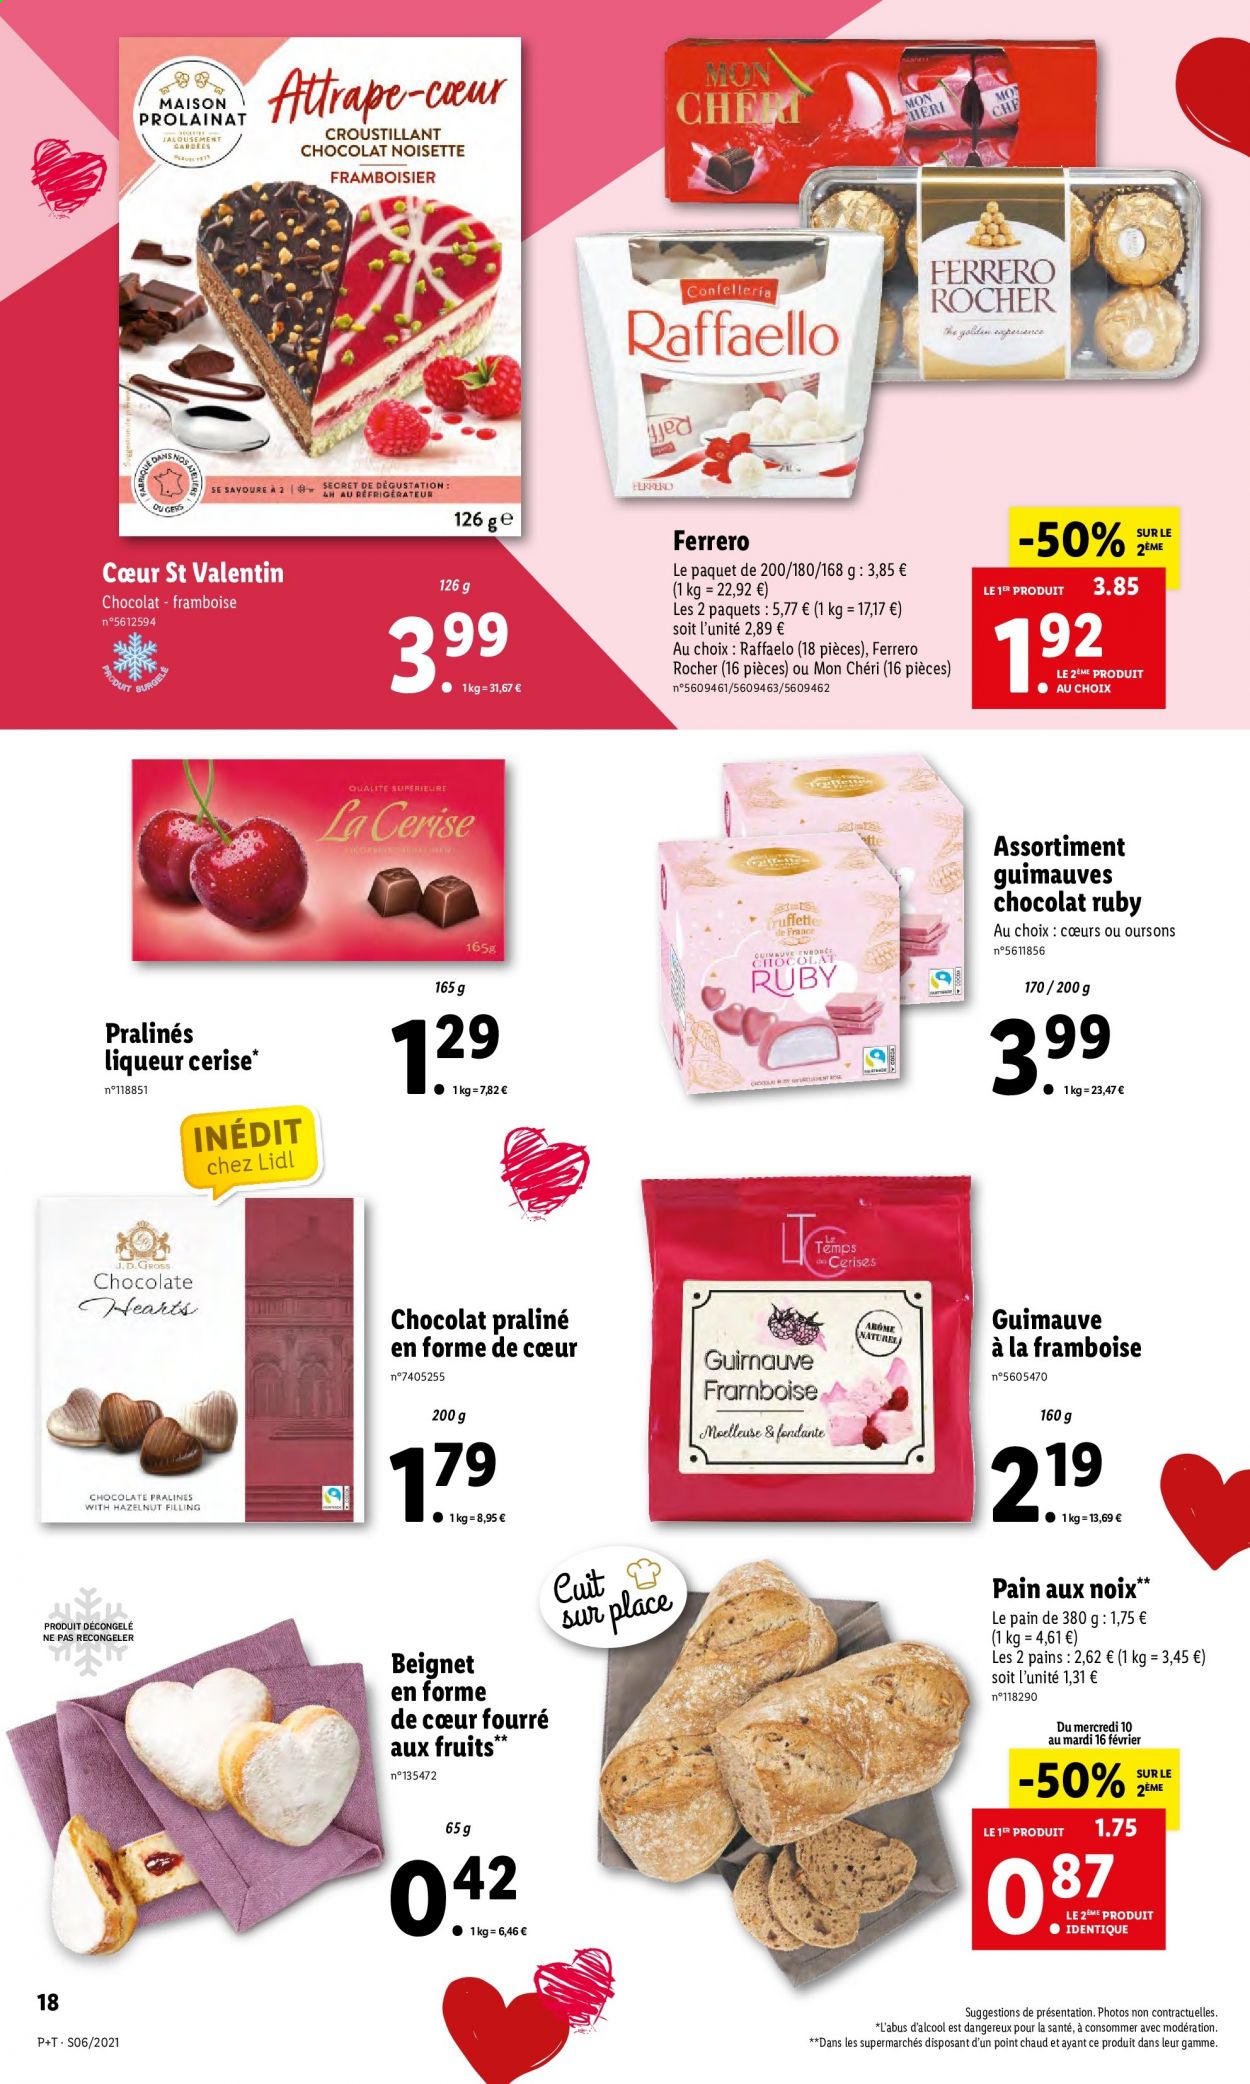 Catalogue Lidl - 10.02.2021 - 16.02.2021. Page 18.